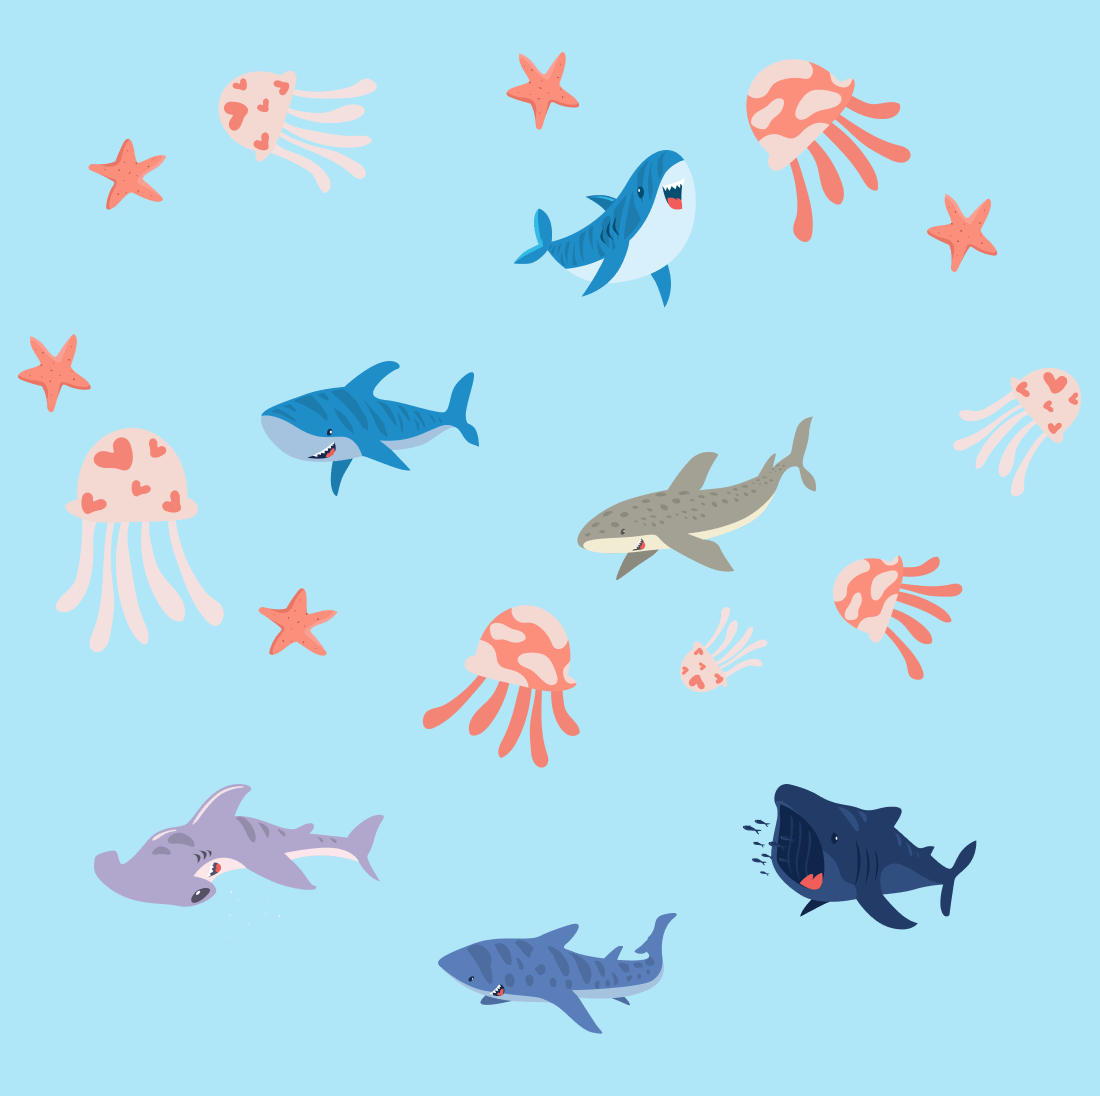 Starfish, jellyfish and other interesting fish came to the baby shark's birthday.